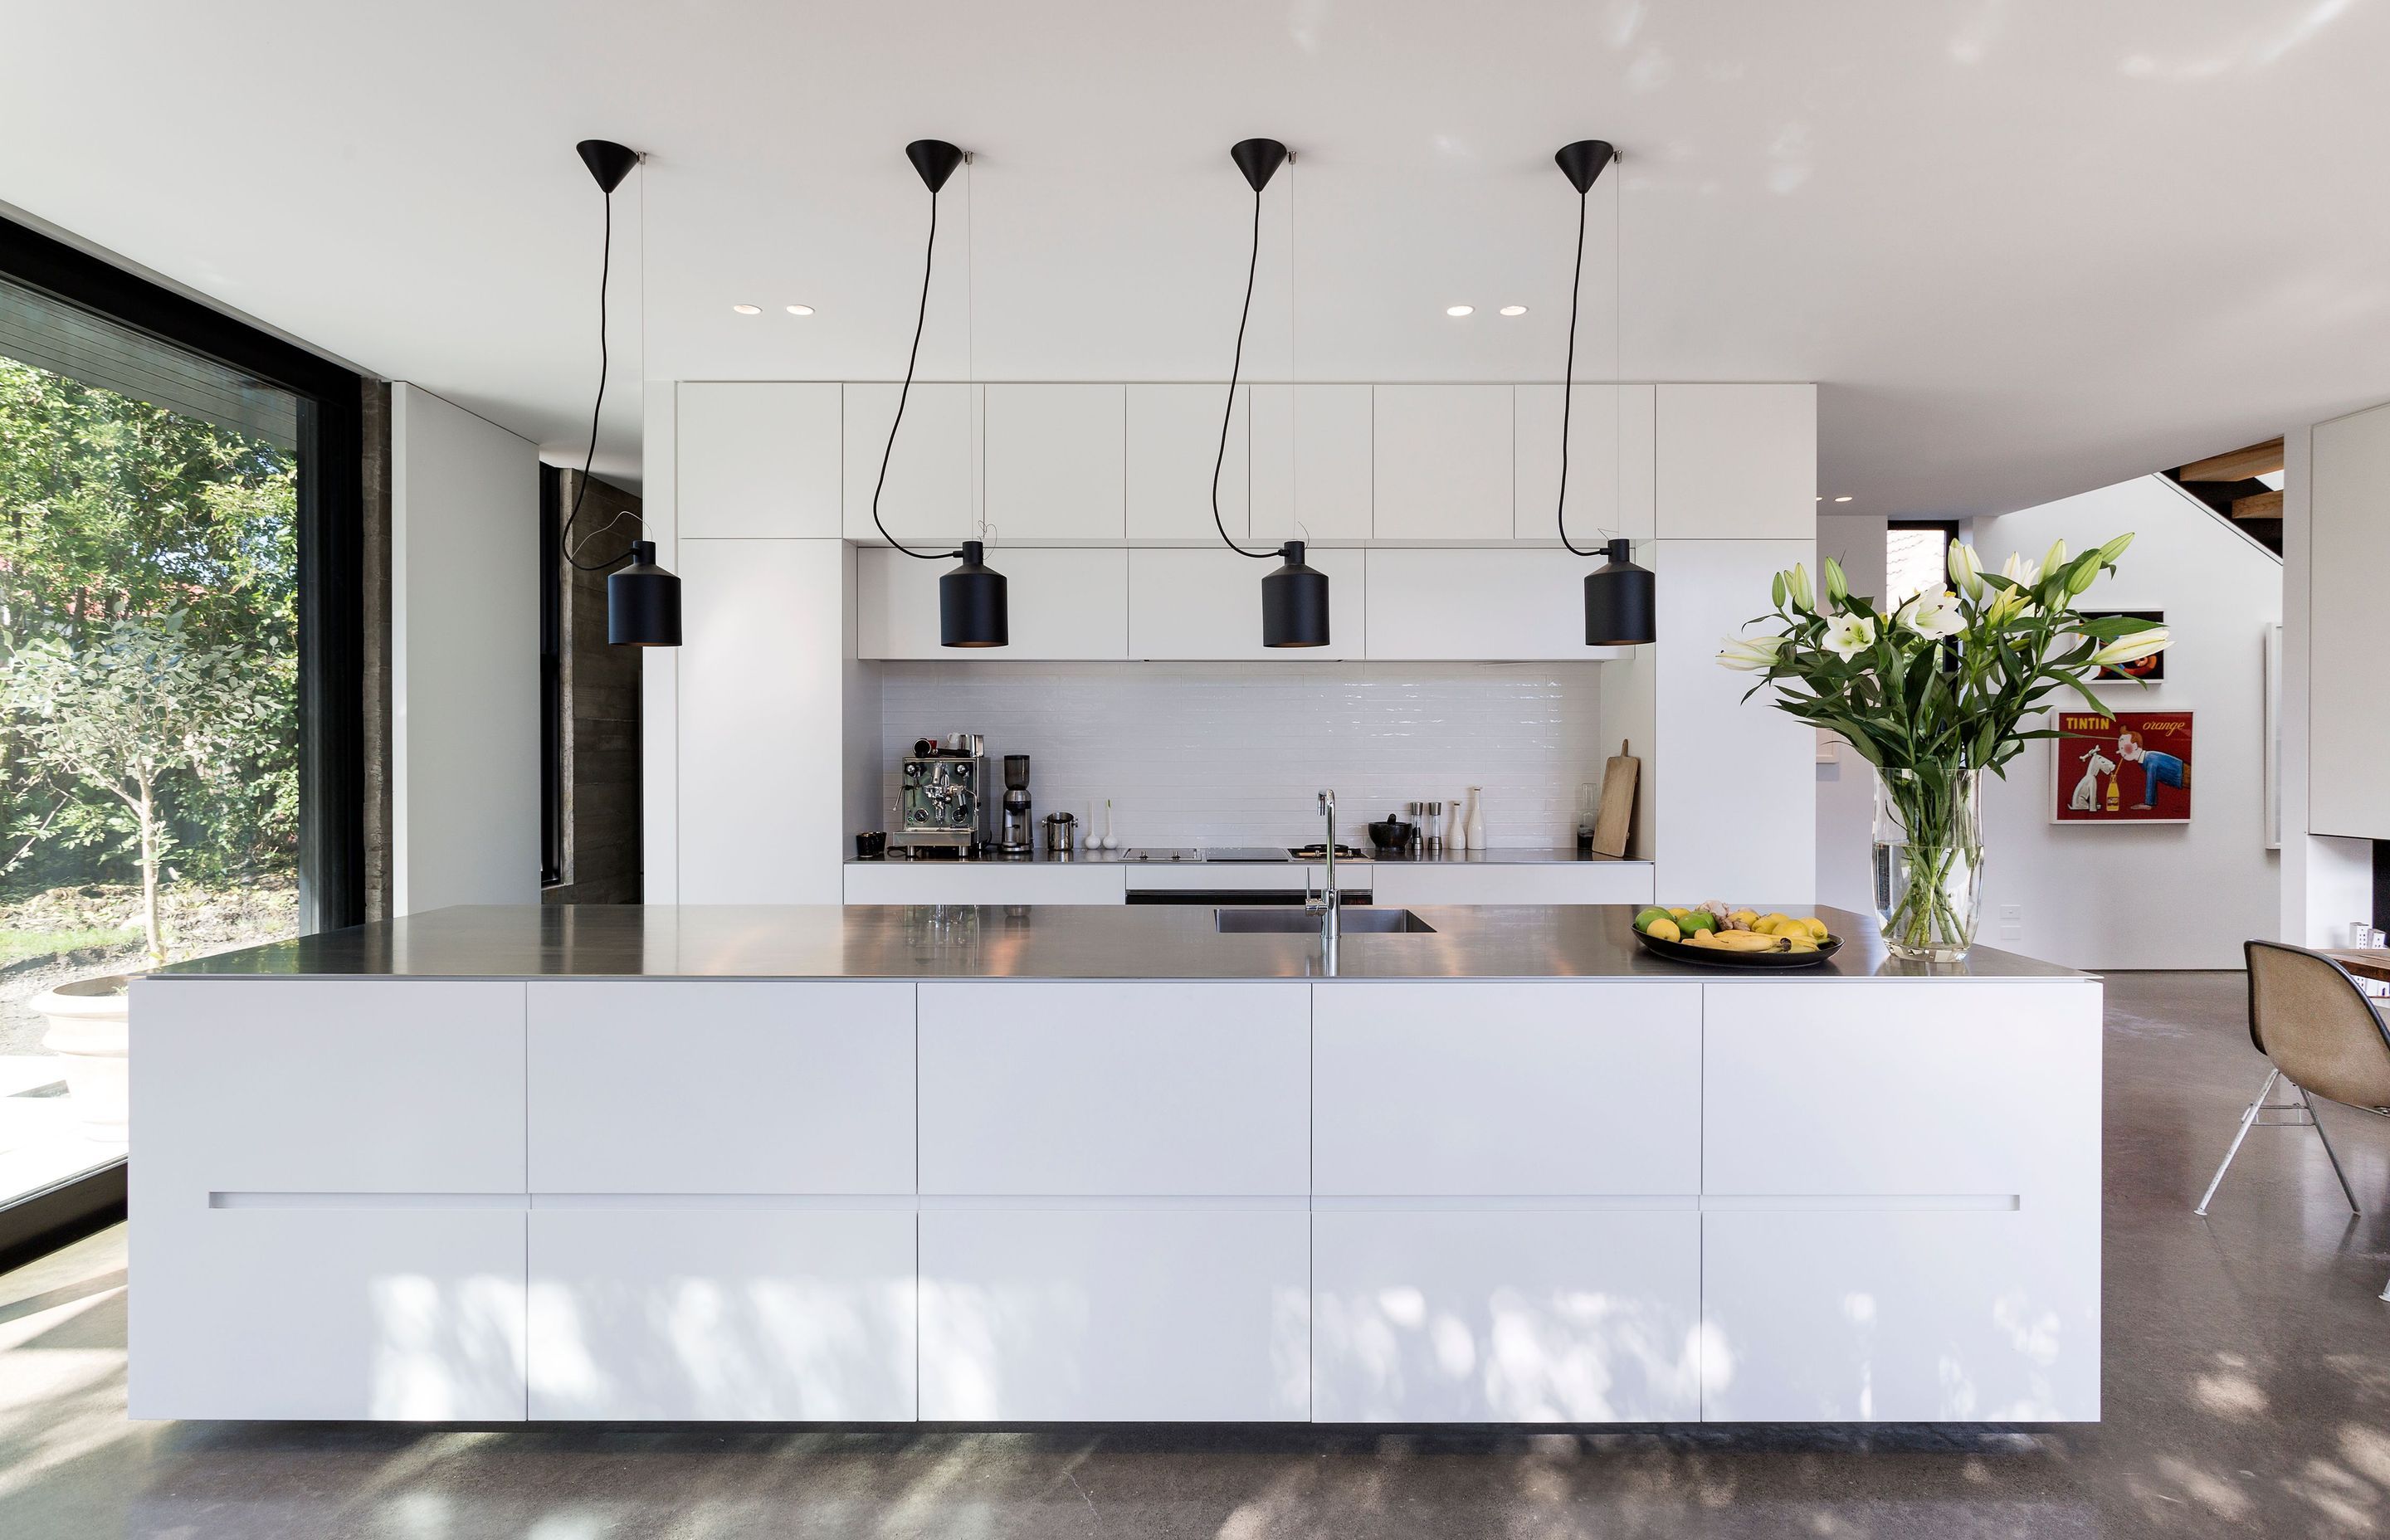 The monochromatic interior colour scheme includes an all-white kitchen with stainless steel benchtops and black lights and fixtures. 